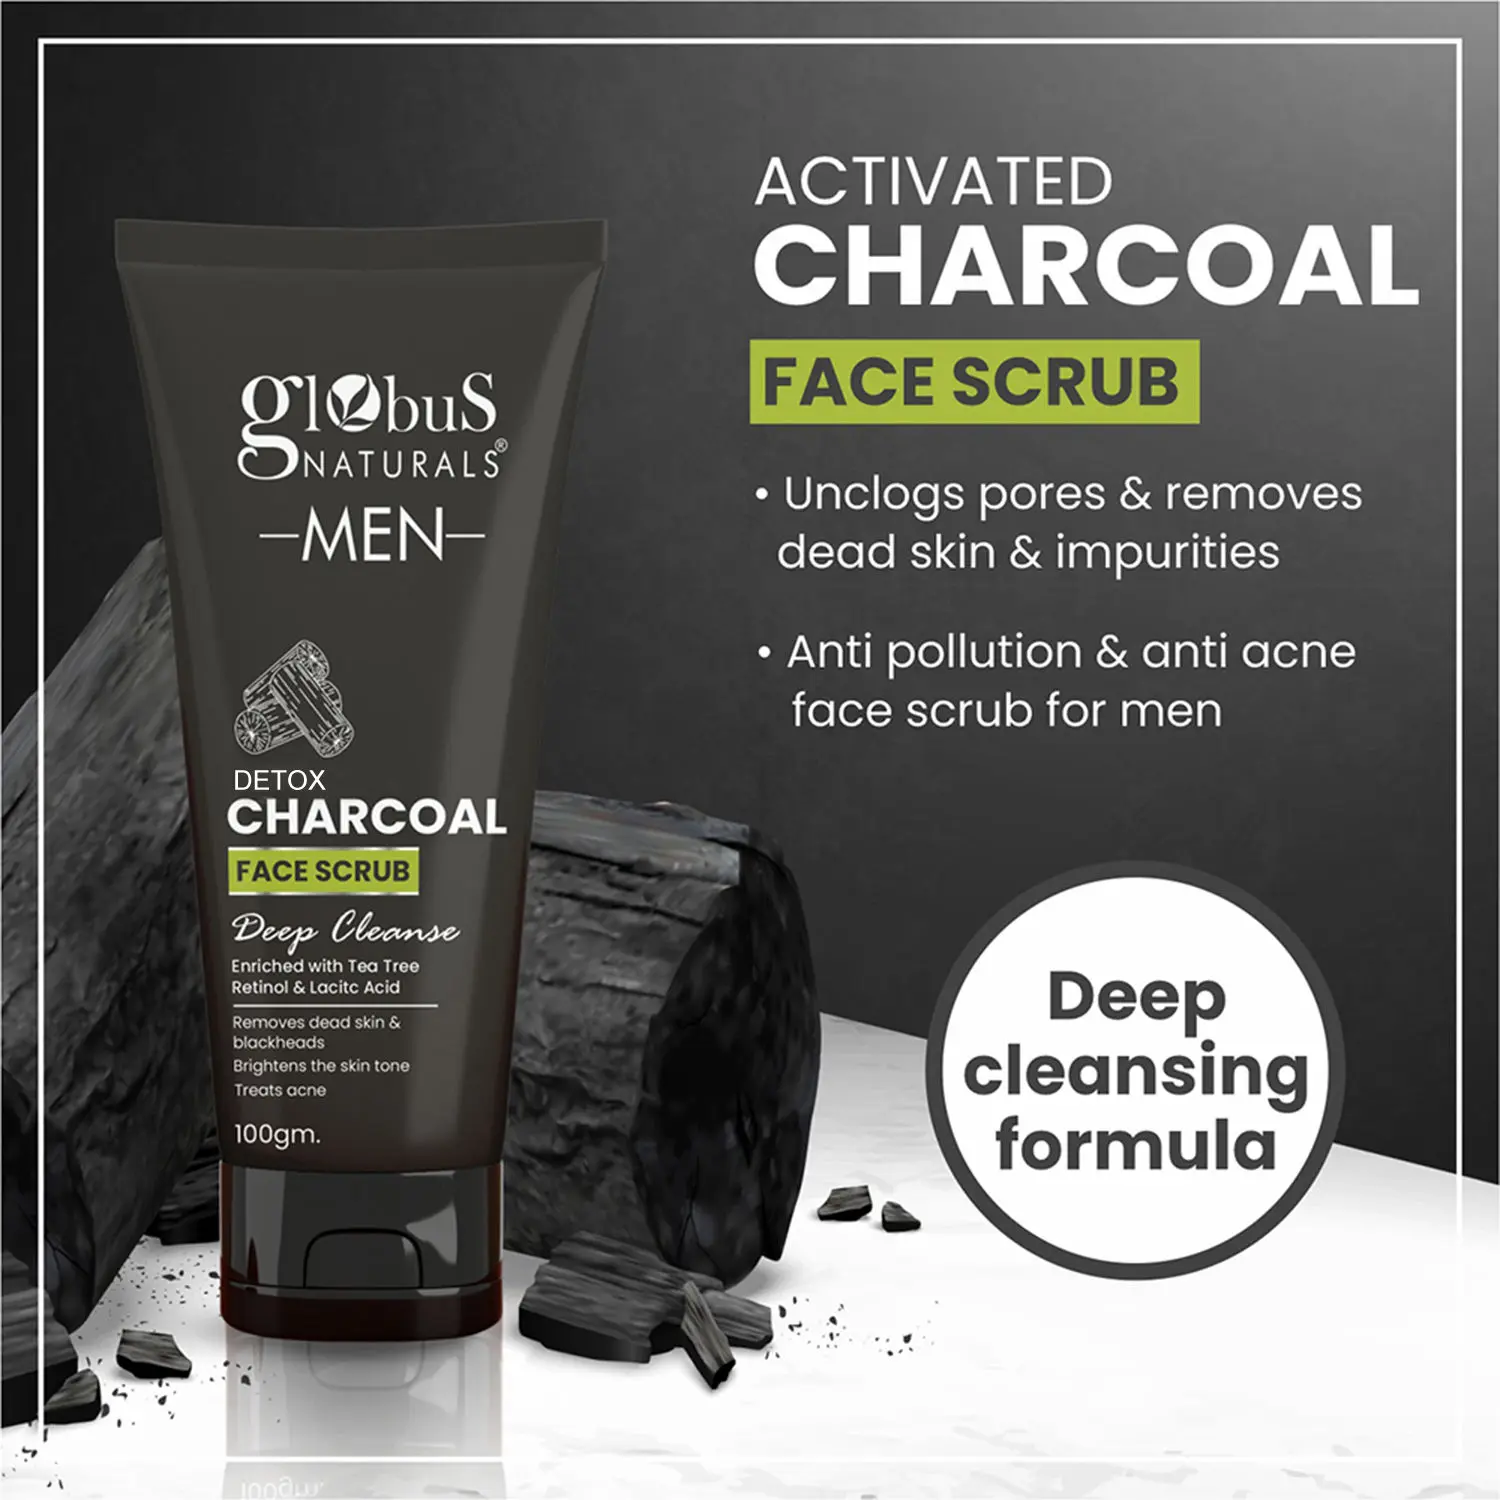 Globus Naturals Anti Pollution & Anti Acne Charcoal Face Scrub, Detox & Deep Cleanse Formula, Fights Pollution and De-Tans skin, For Men with Oily & Acne Prone Skin, 100 gms